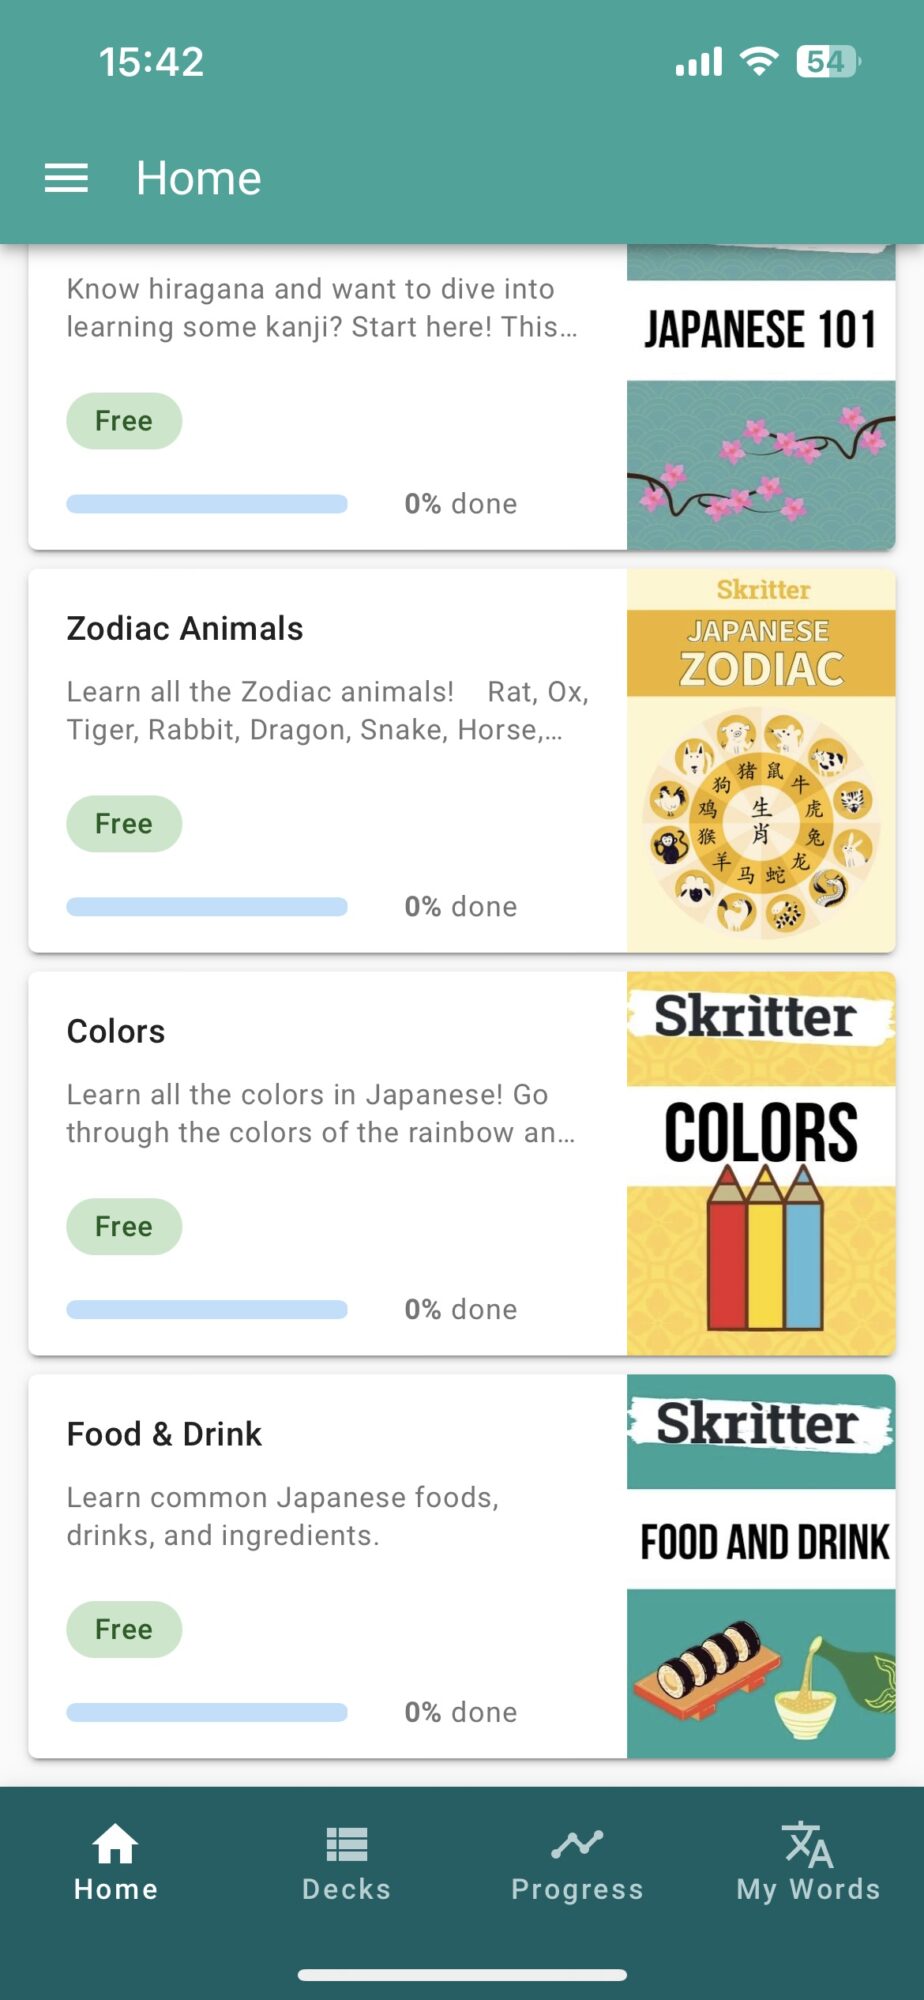 A screenshot of the free version of Skritter on mobile, showing some of the decks you get free access to.